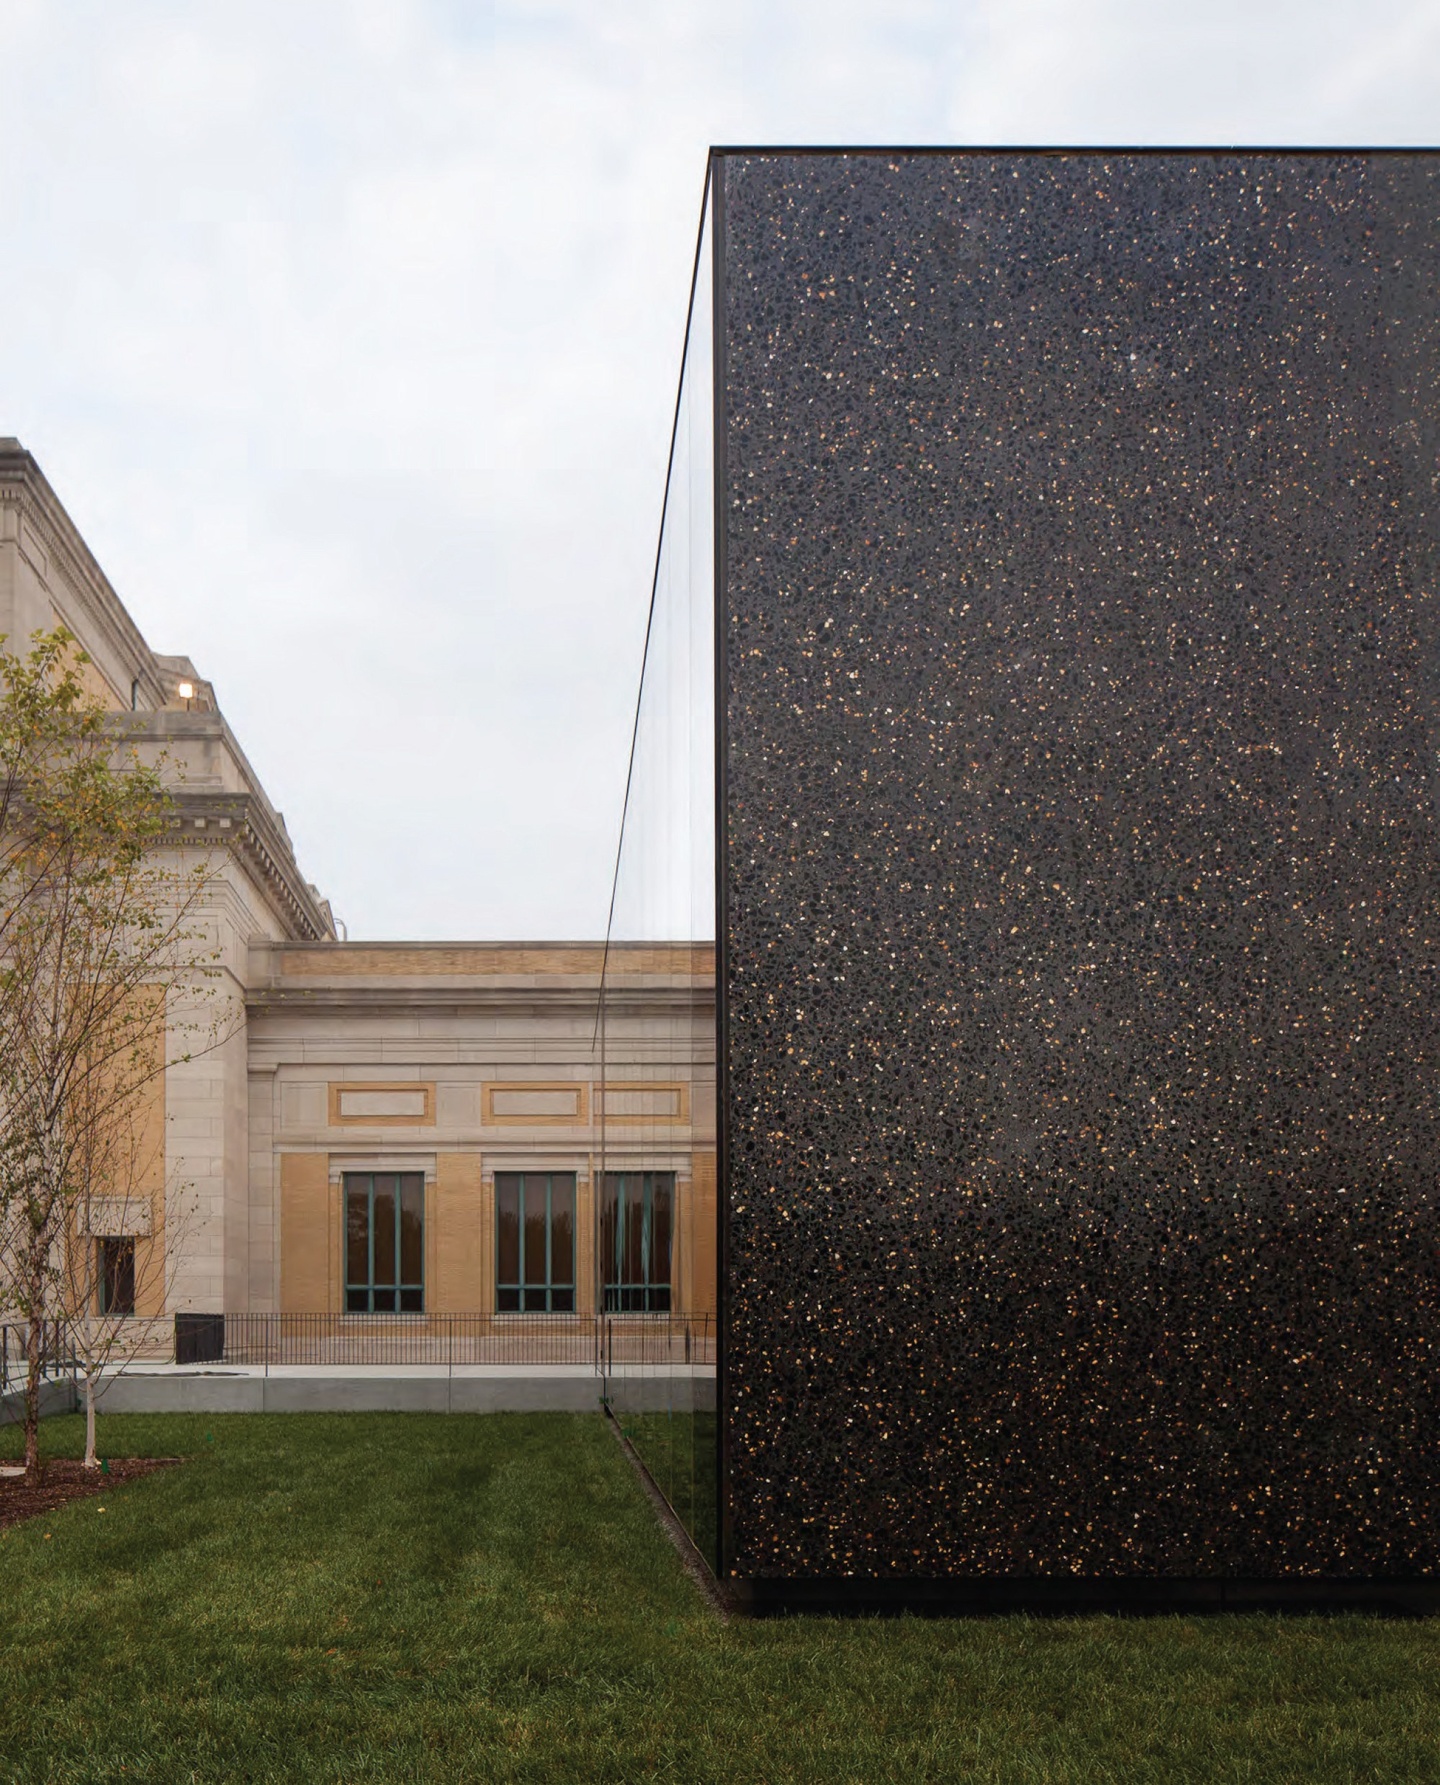 Dark concrete facade of one face of the Saint Louis Art Museum expansion, with the original building to the left.